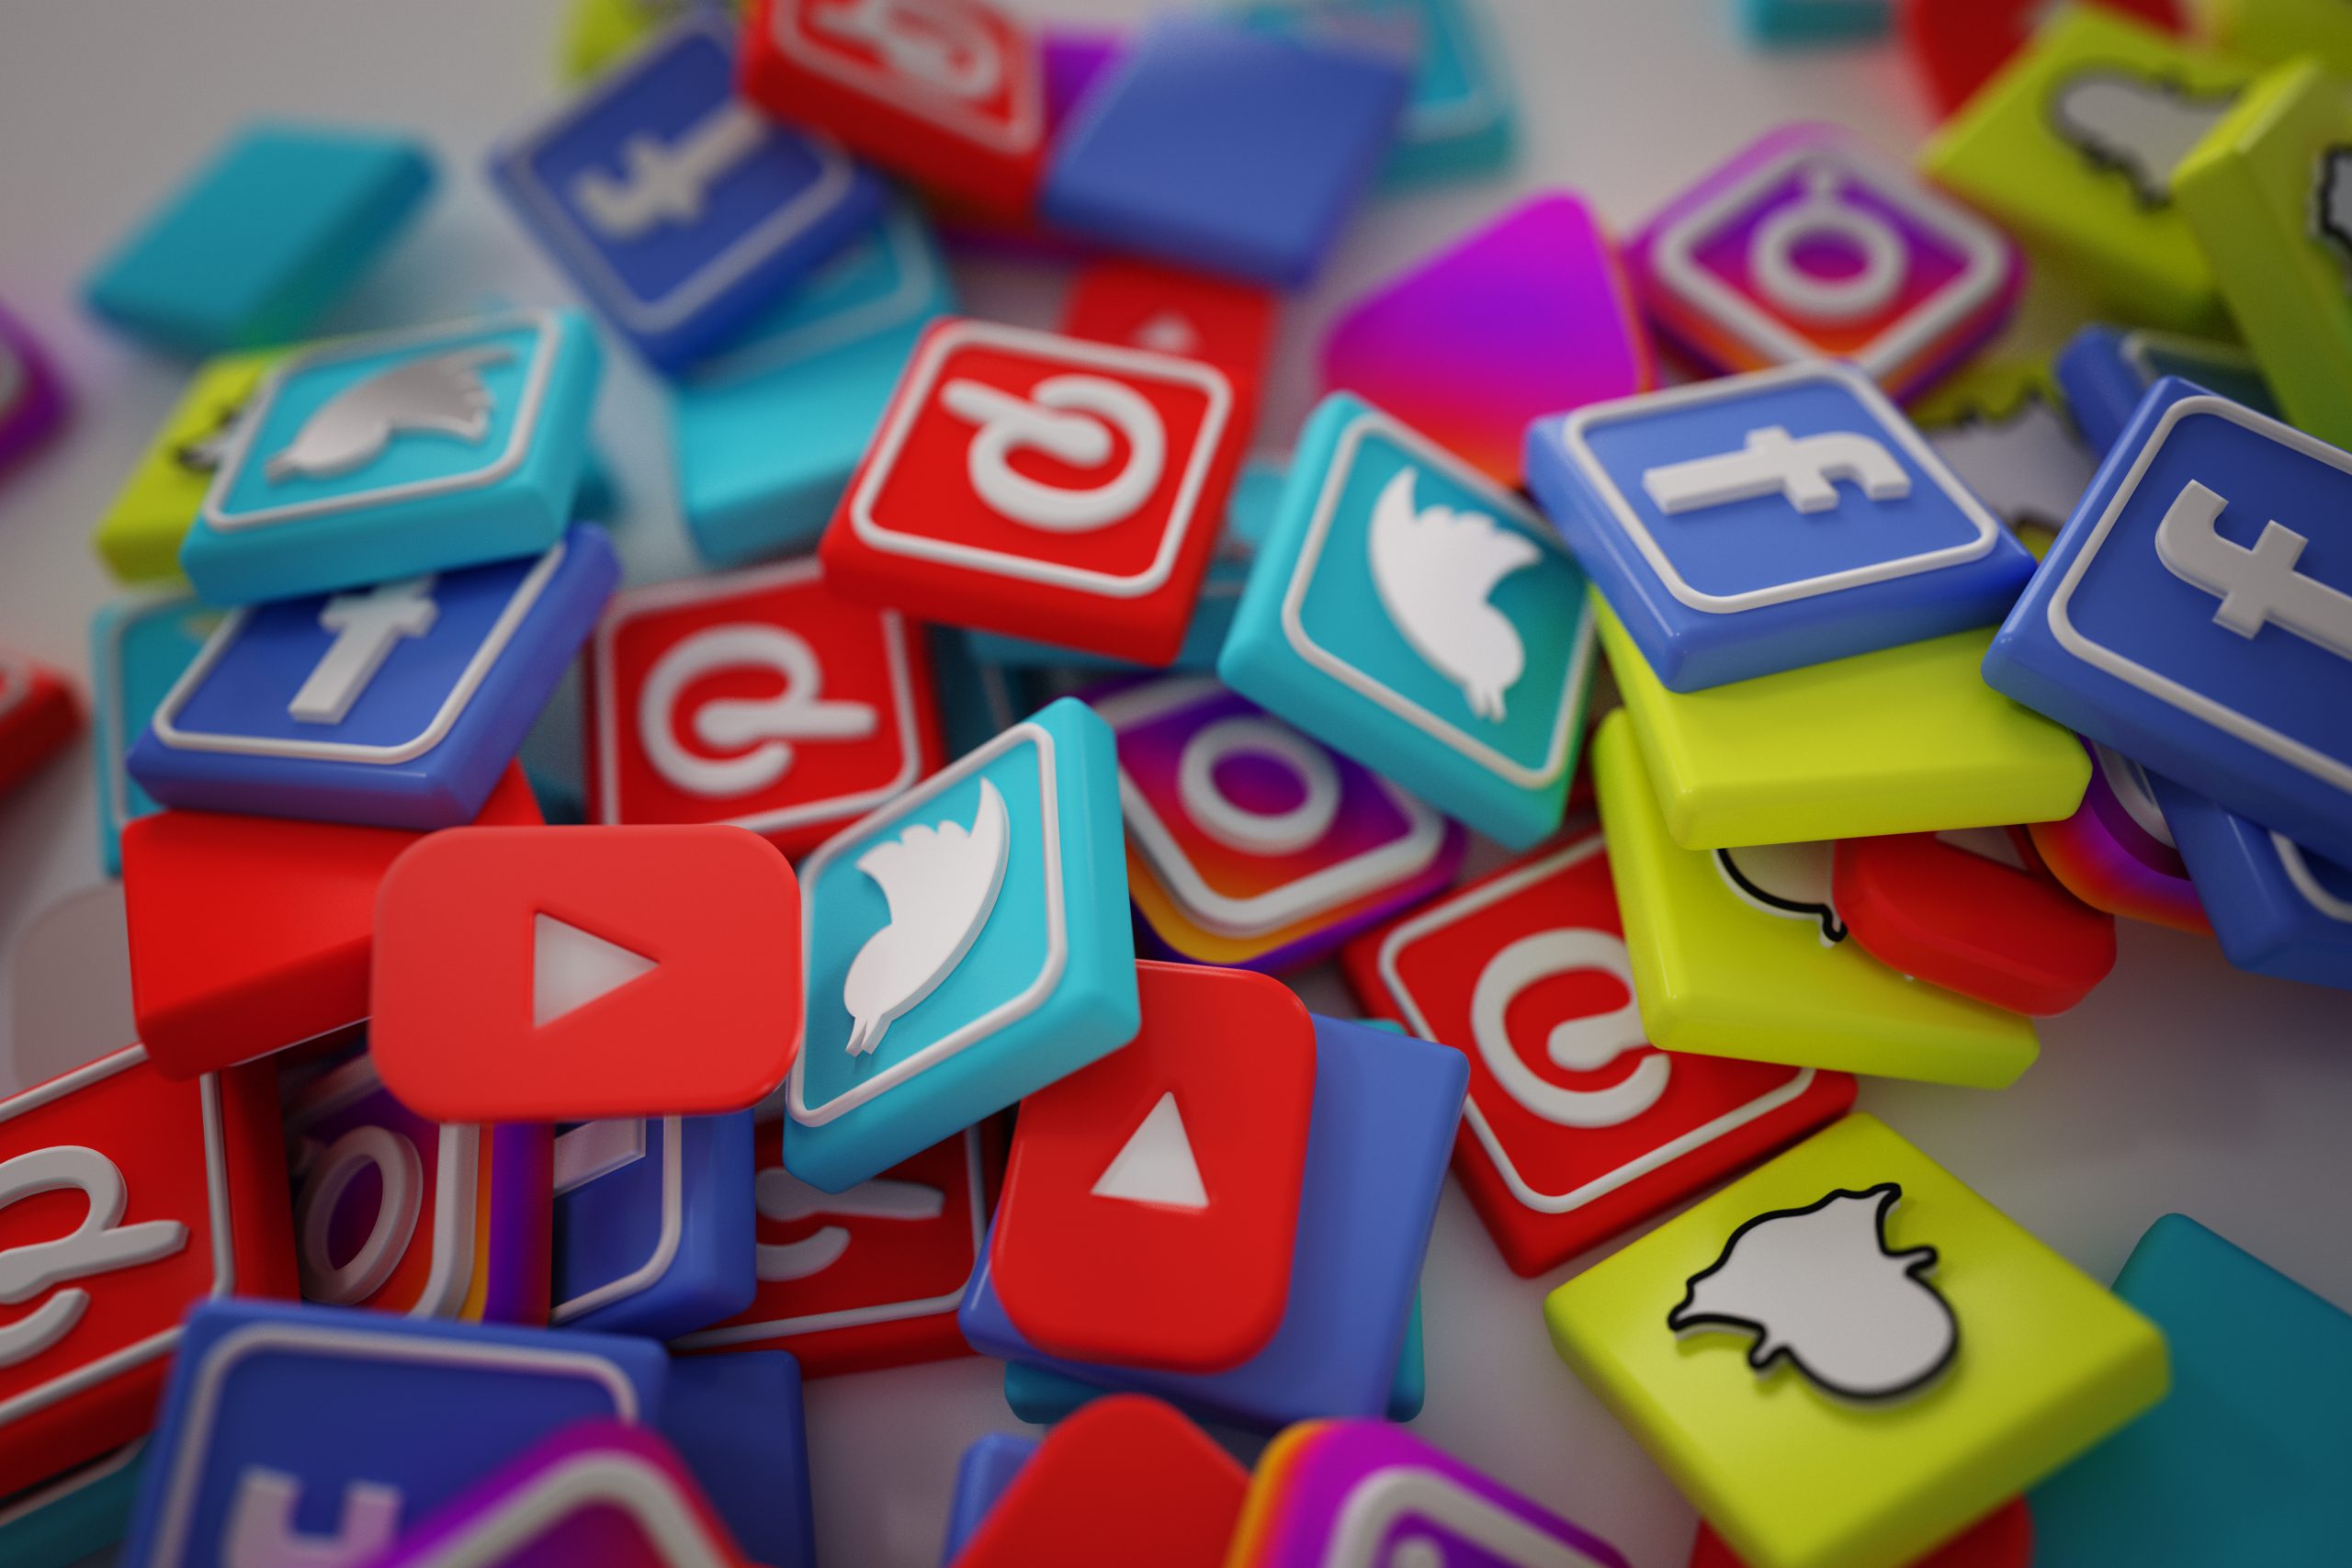 Pile of Twitter, YouTube, Facebook, Pinterest and Snapchat logos